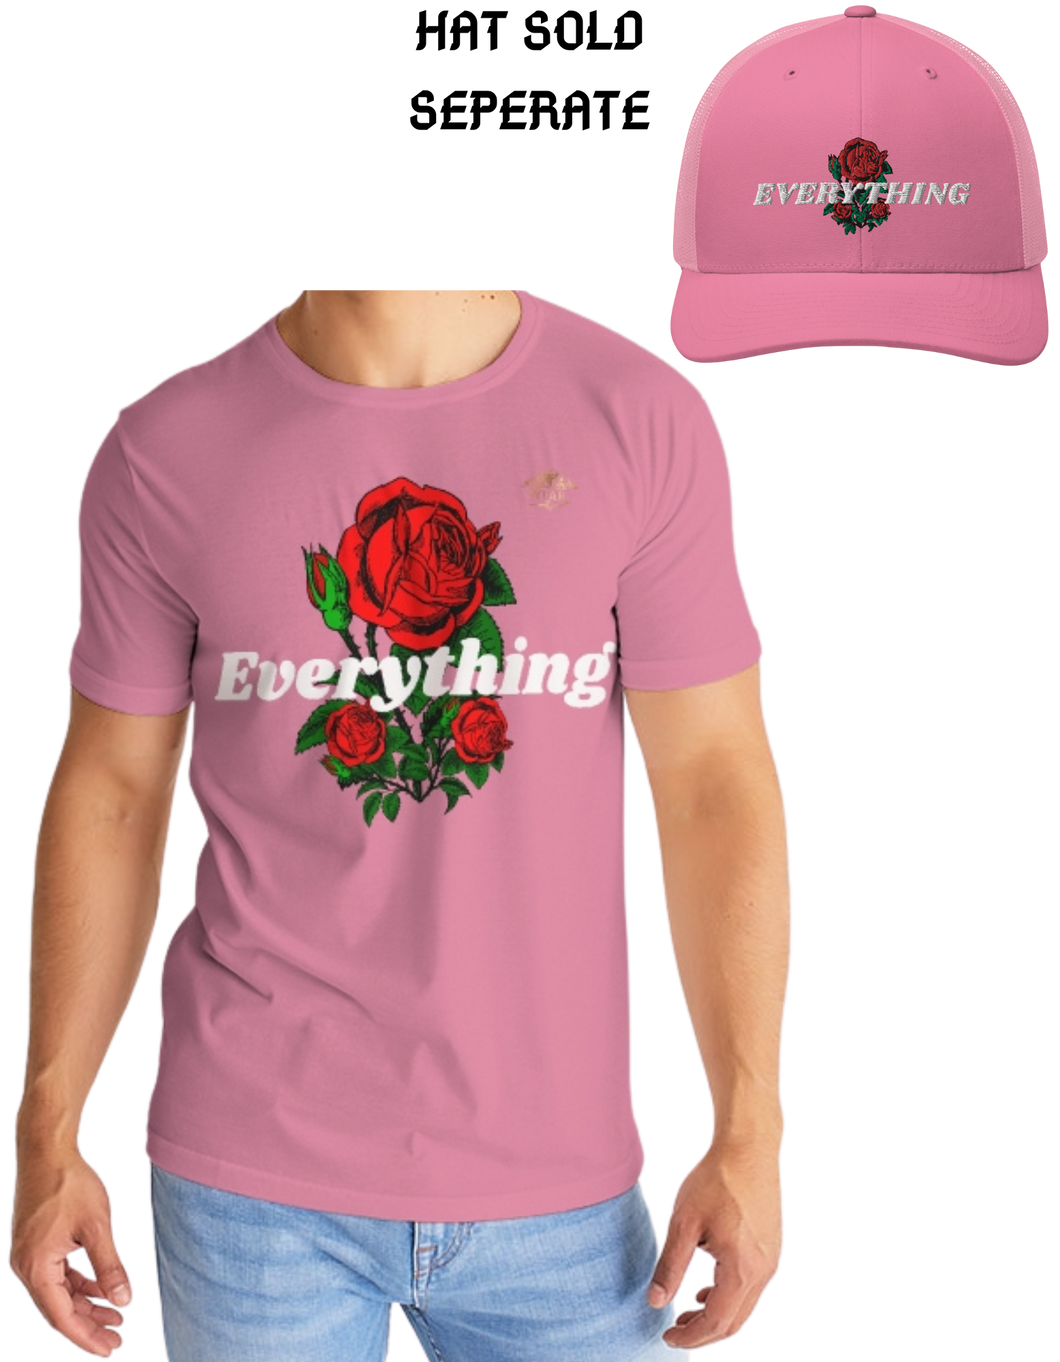 EVERYTHING ROSES LINK UP T-SHIRT - PINK Men's Tee